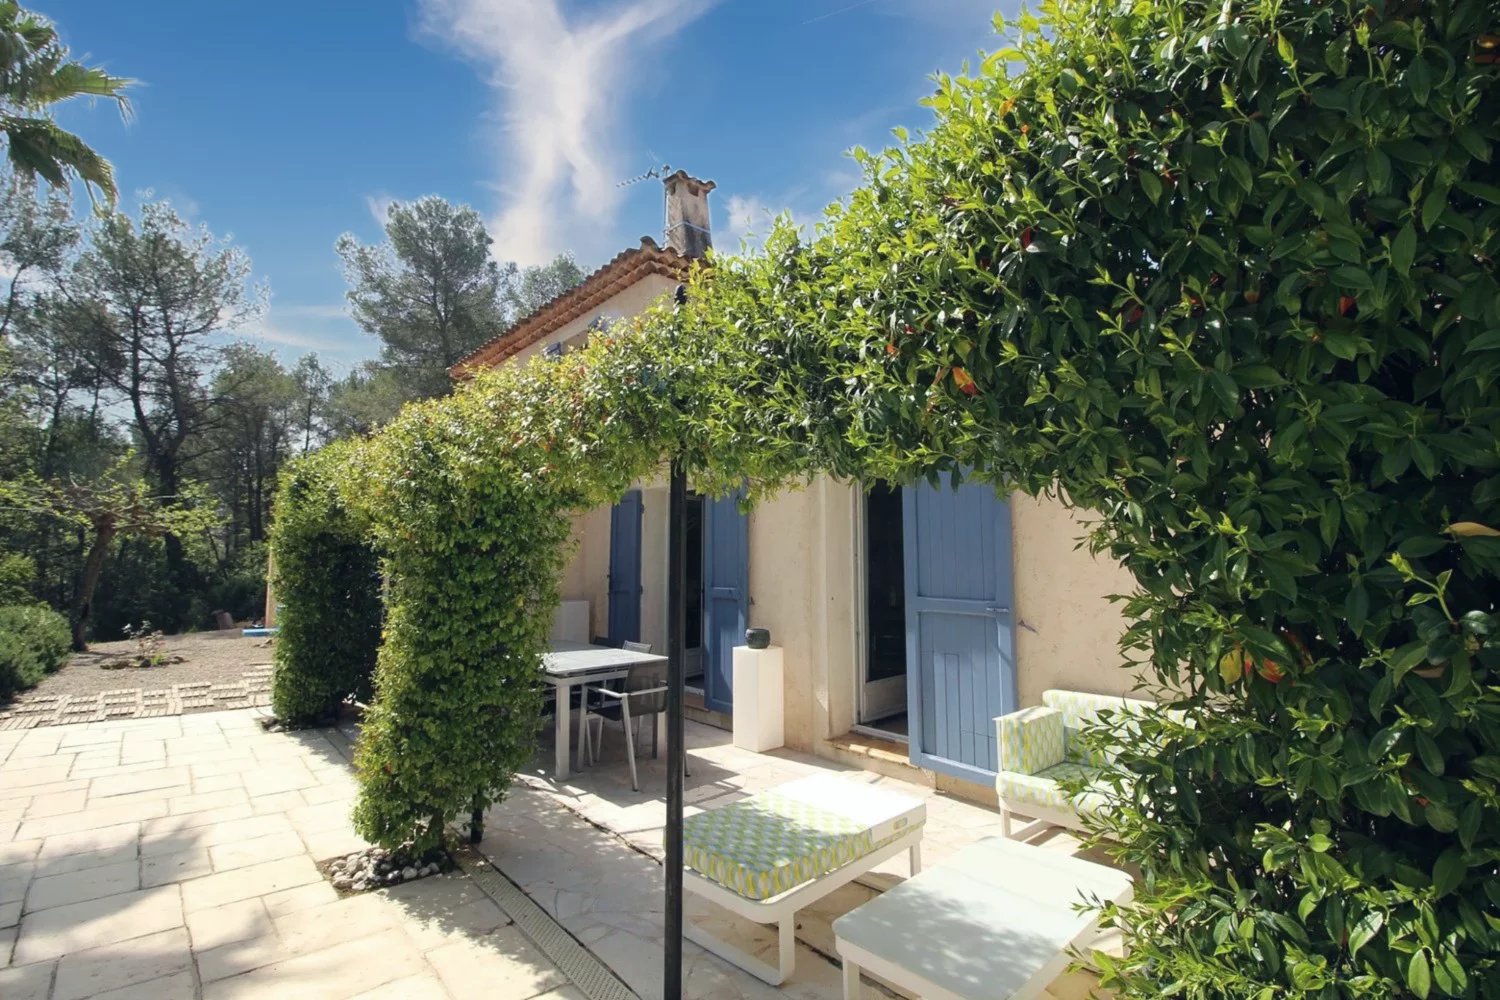 Well build house with 4 bedrooms and a pool - Fayence